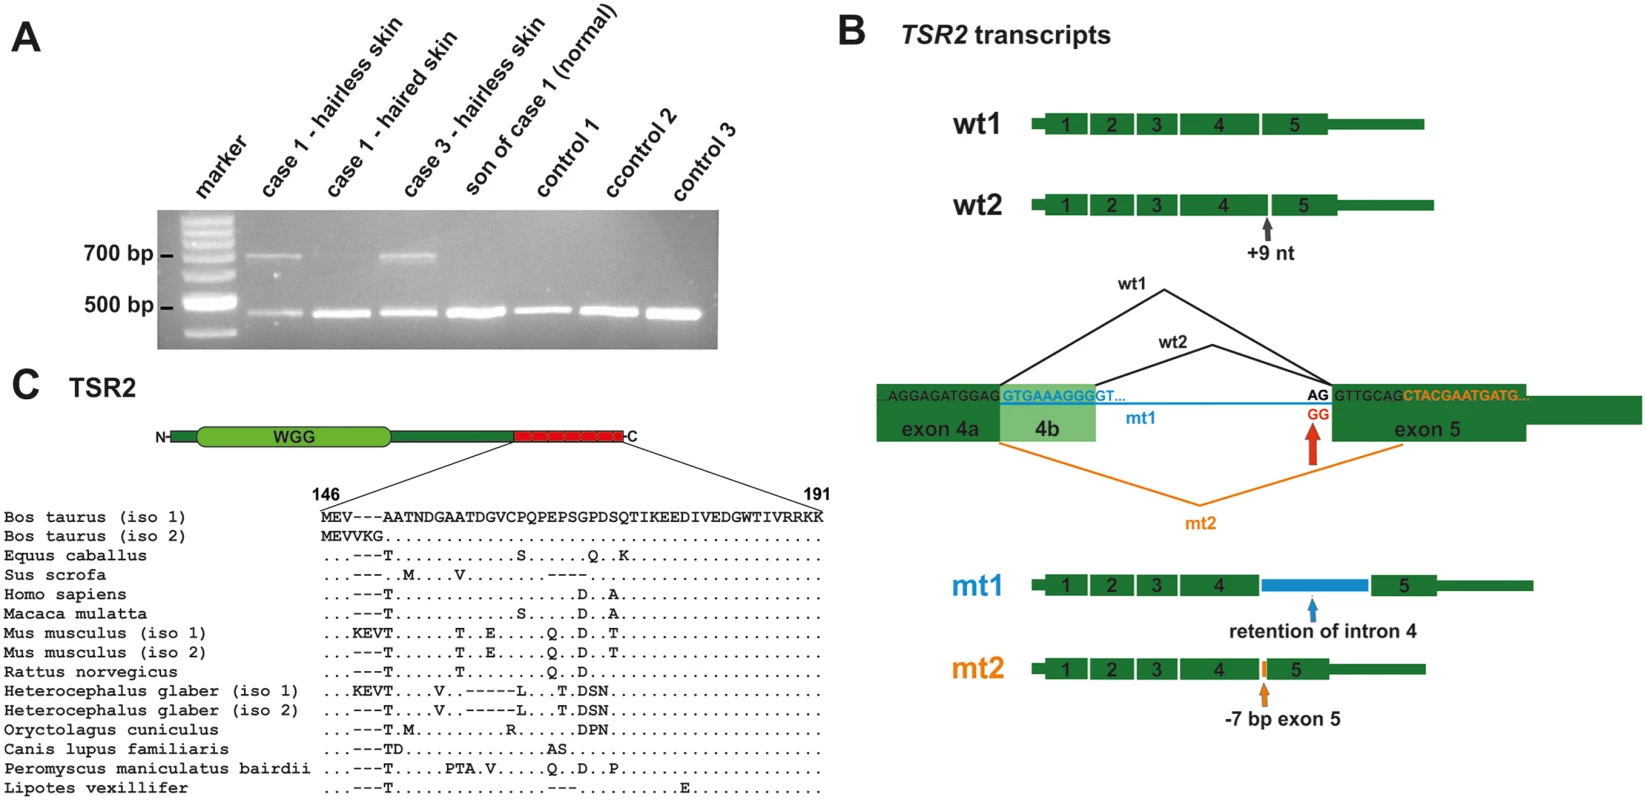 A <i>TSR2</i> splice site mutation leads to aberrant splicing in hairless skin.